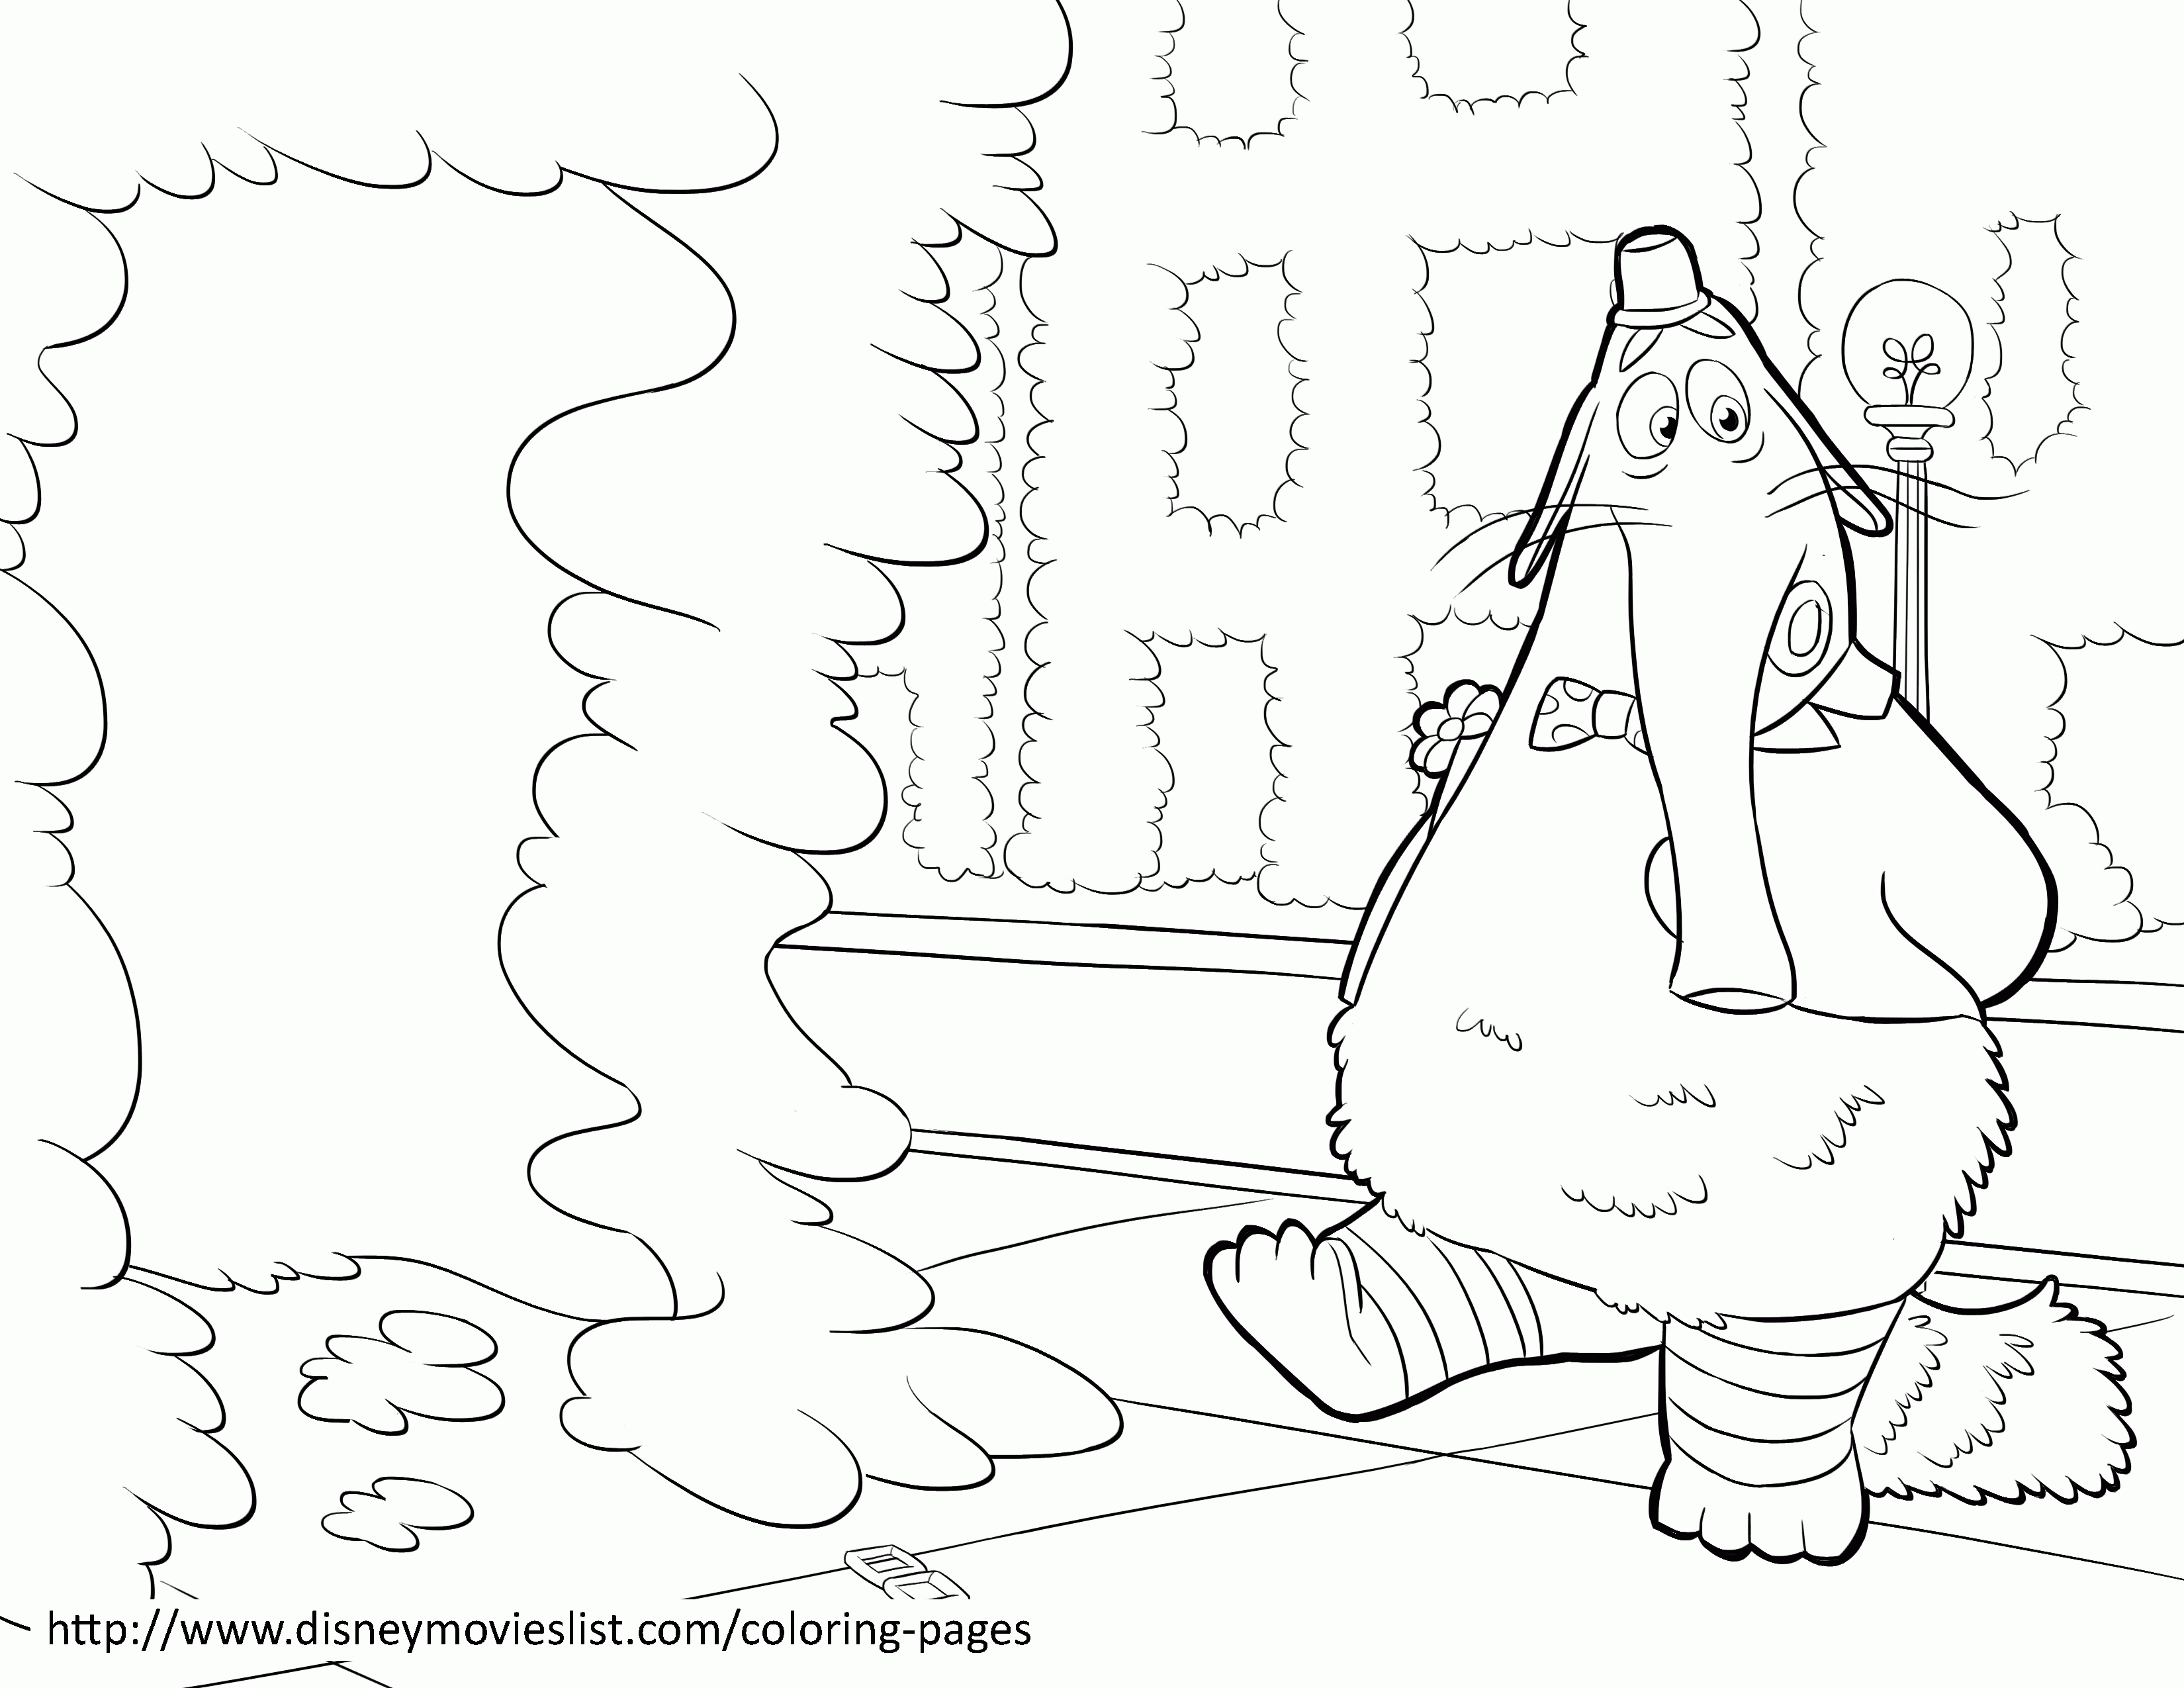 Bing Bong - Inside Out Coloring Pages